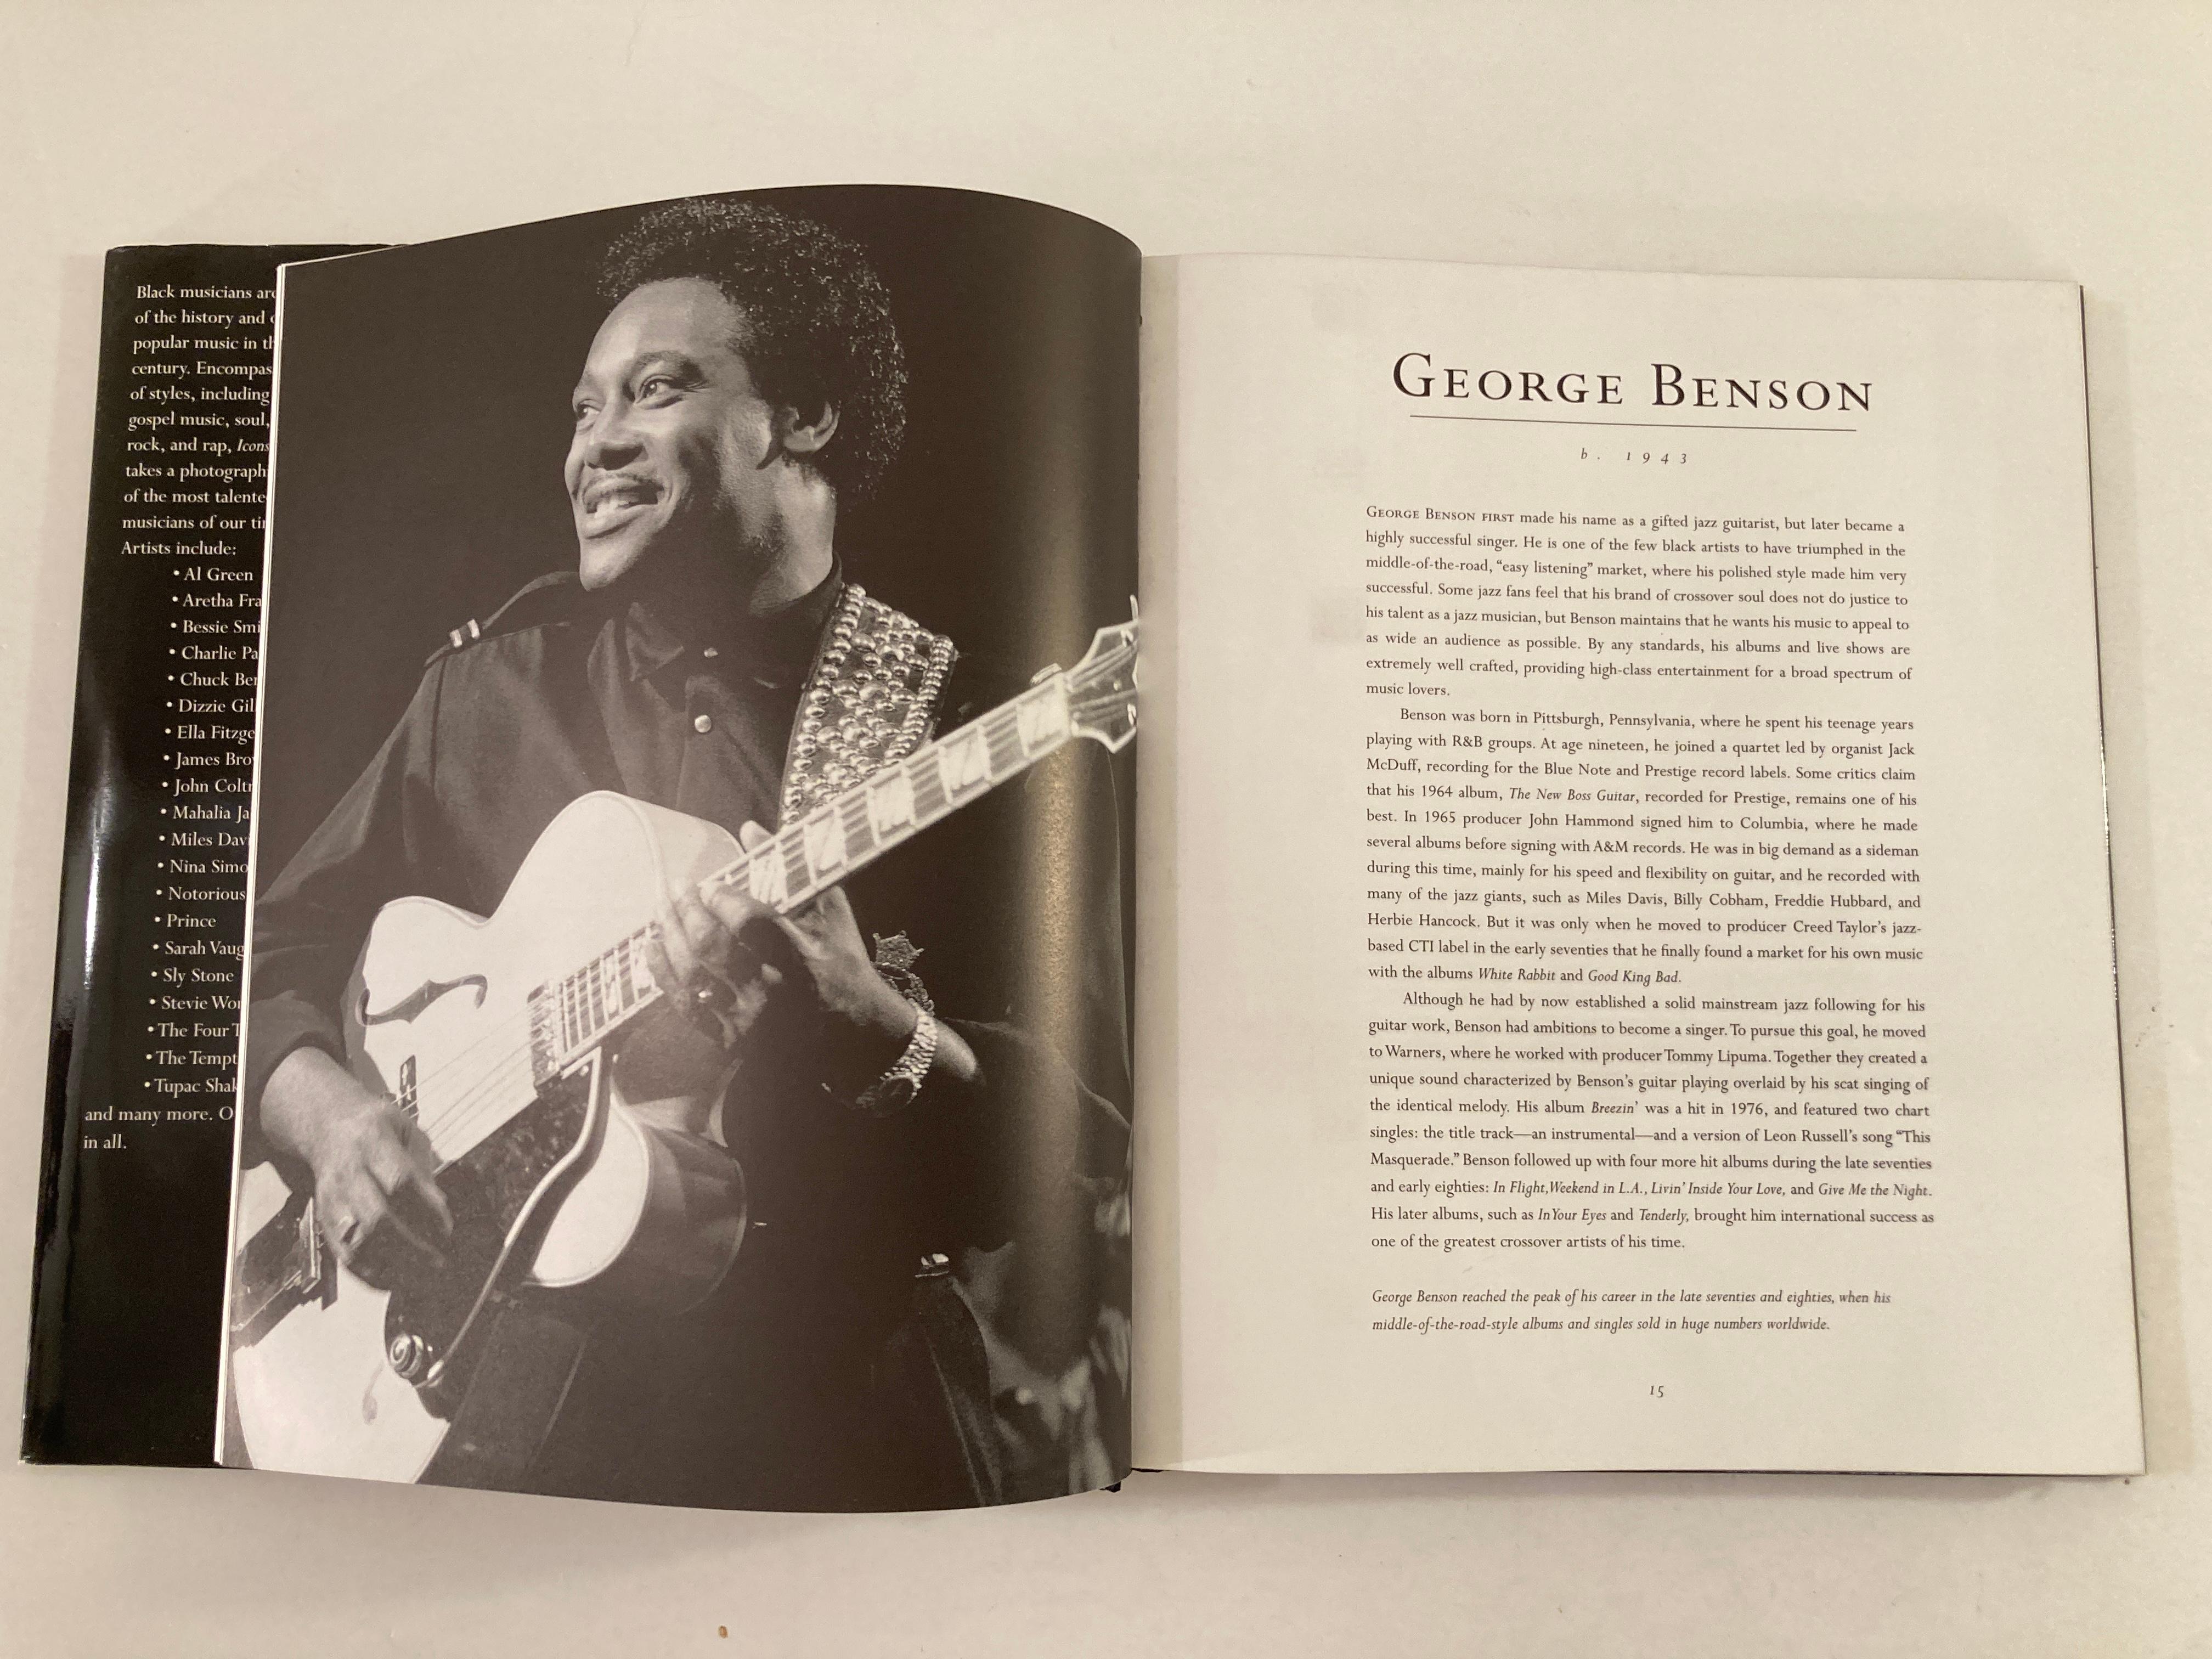 Icons Of Black Music A History In Photographs, 1900-2000 by Charlotte Greig 2